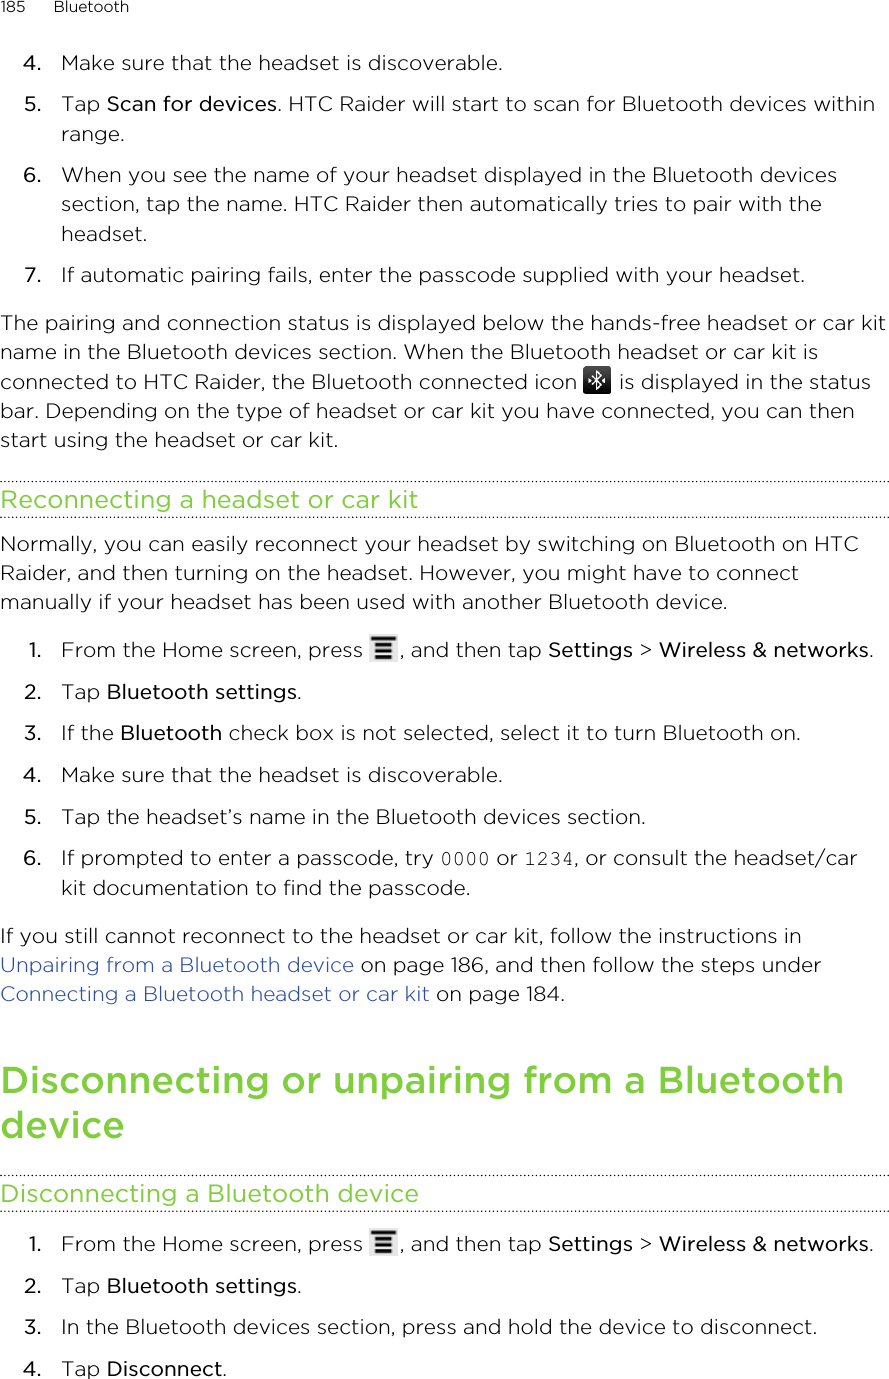 4. Make sure that the headset is discoverable.5. Tap Scan for devices. HTC Raider will start to scan for Bluetooth devices withinrange.6. When you see the name of your headset displayed in the Bluetooth devicessection, tap the name. HTC Raider then automatically tries to pair with theheadset.7. If automatic pairing fails, enter the passcode supplied with your headset.The pairing and connection status is displayed below the hands-free headset or car kitname in the Bluetooth devices section. When the Bluetooth headset or car kit isconnected to HTC Raider, the Bluetooth connected icon   is displayed in the statusbar. Depending on the type of headset or car kit you have connected, you can thenstart using the headset or car kit.Reconnecting a headset or car kitNormally, you can easily reconnect your headset by switching on Bluetooth on HTCRaider, and then turning on the headset. However, you might have to connectmanually if your headset has been used with another Bluetooth device.1. From the Home screen, press  , and then tap Settings &gt; Wireless &amp; networks.2. Tap Bluetooth settings.3. If the Bluetooth check box is not selected, select it to turn Bluetooth on.4. Make sure that the headset is discoverable.5. Tap the headset’s name in the Bluetooth devices section.6. If prompted to enter a passcode, try 0000 or 1234, or consult the headset/carkit documentation to find the passcode.If you still cannot reconnect to the headset or car kit, follow the instructions in Unpairing from a Bluetooth device on page 186, and then follow the steps under Connecting a Bluetooth headset or car kit on page 184.Disconnecting or unpairing from a BluetoothdeviceDisconnecting a Bluetooth device1. From the Home screen, press  , and then tap Settings &gt; Wireless &amp; networks.2. Tap Bluetooth settings.3. In the Bluetooth devices section, press and hold the device to disconnect.4. Tap Disconnect.185 Bluetooth